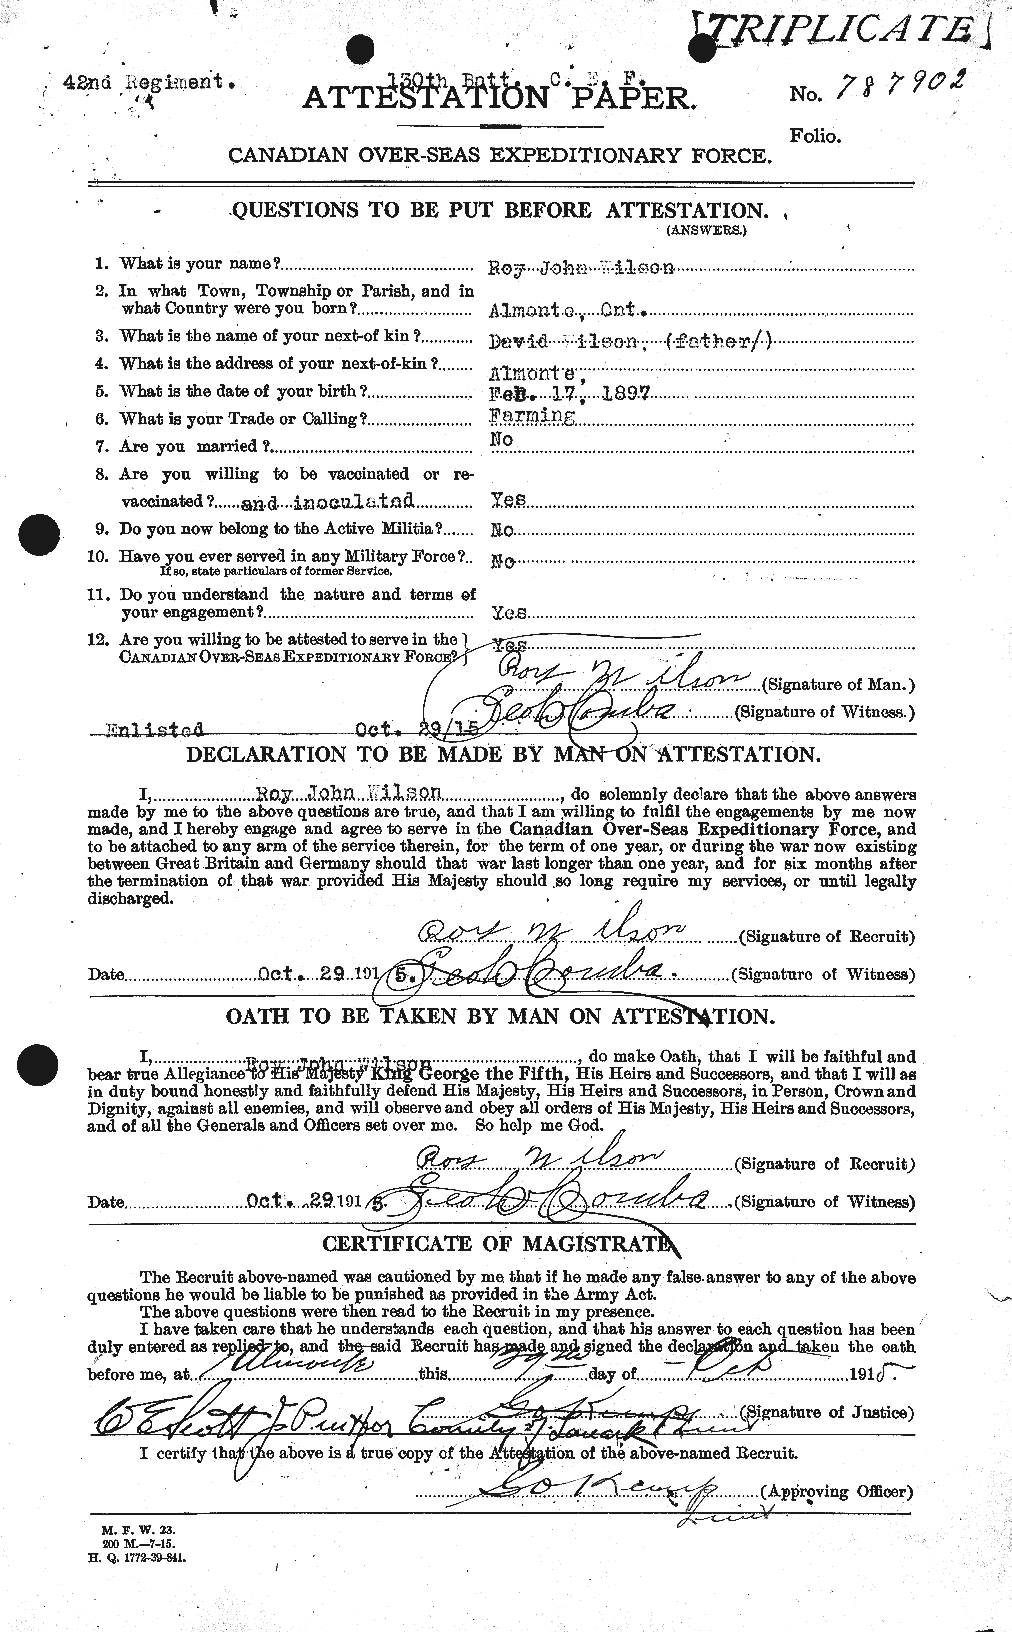 Personnel Records of the First World War - CEF 681061a